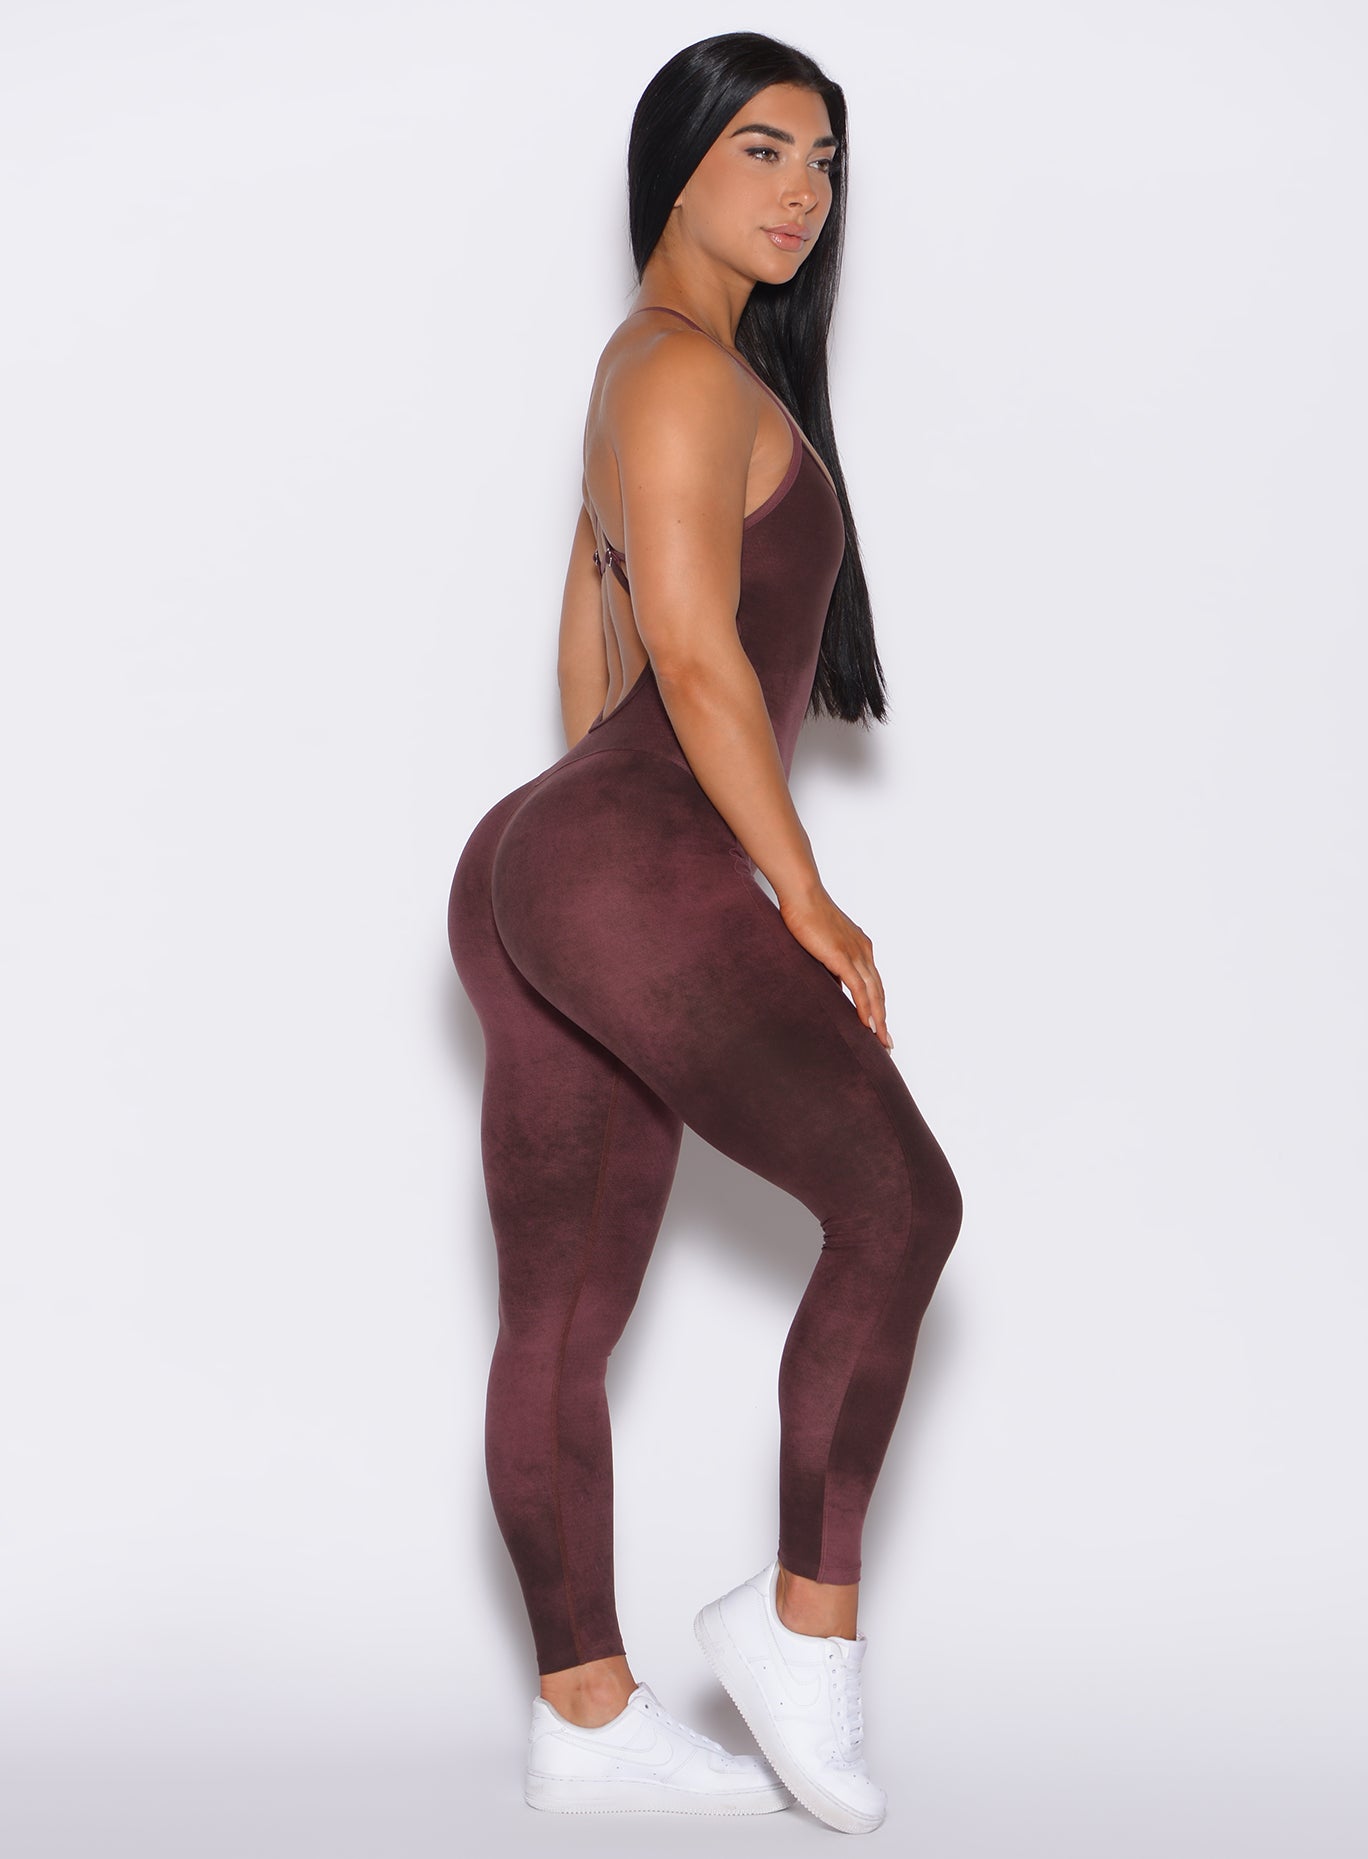 Right side profile view of a model in our Sculpt Bodysuit in Vintage Port color along with the matching shape shrug